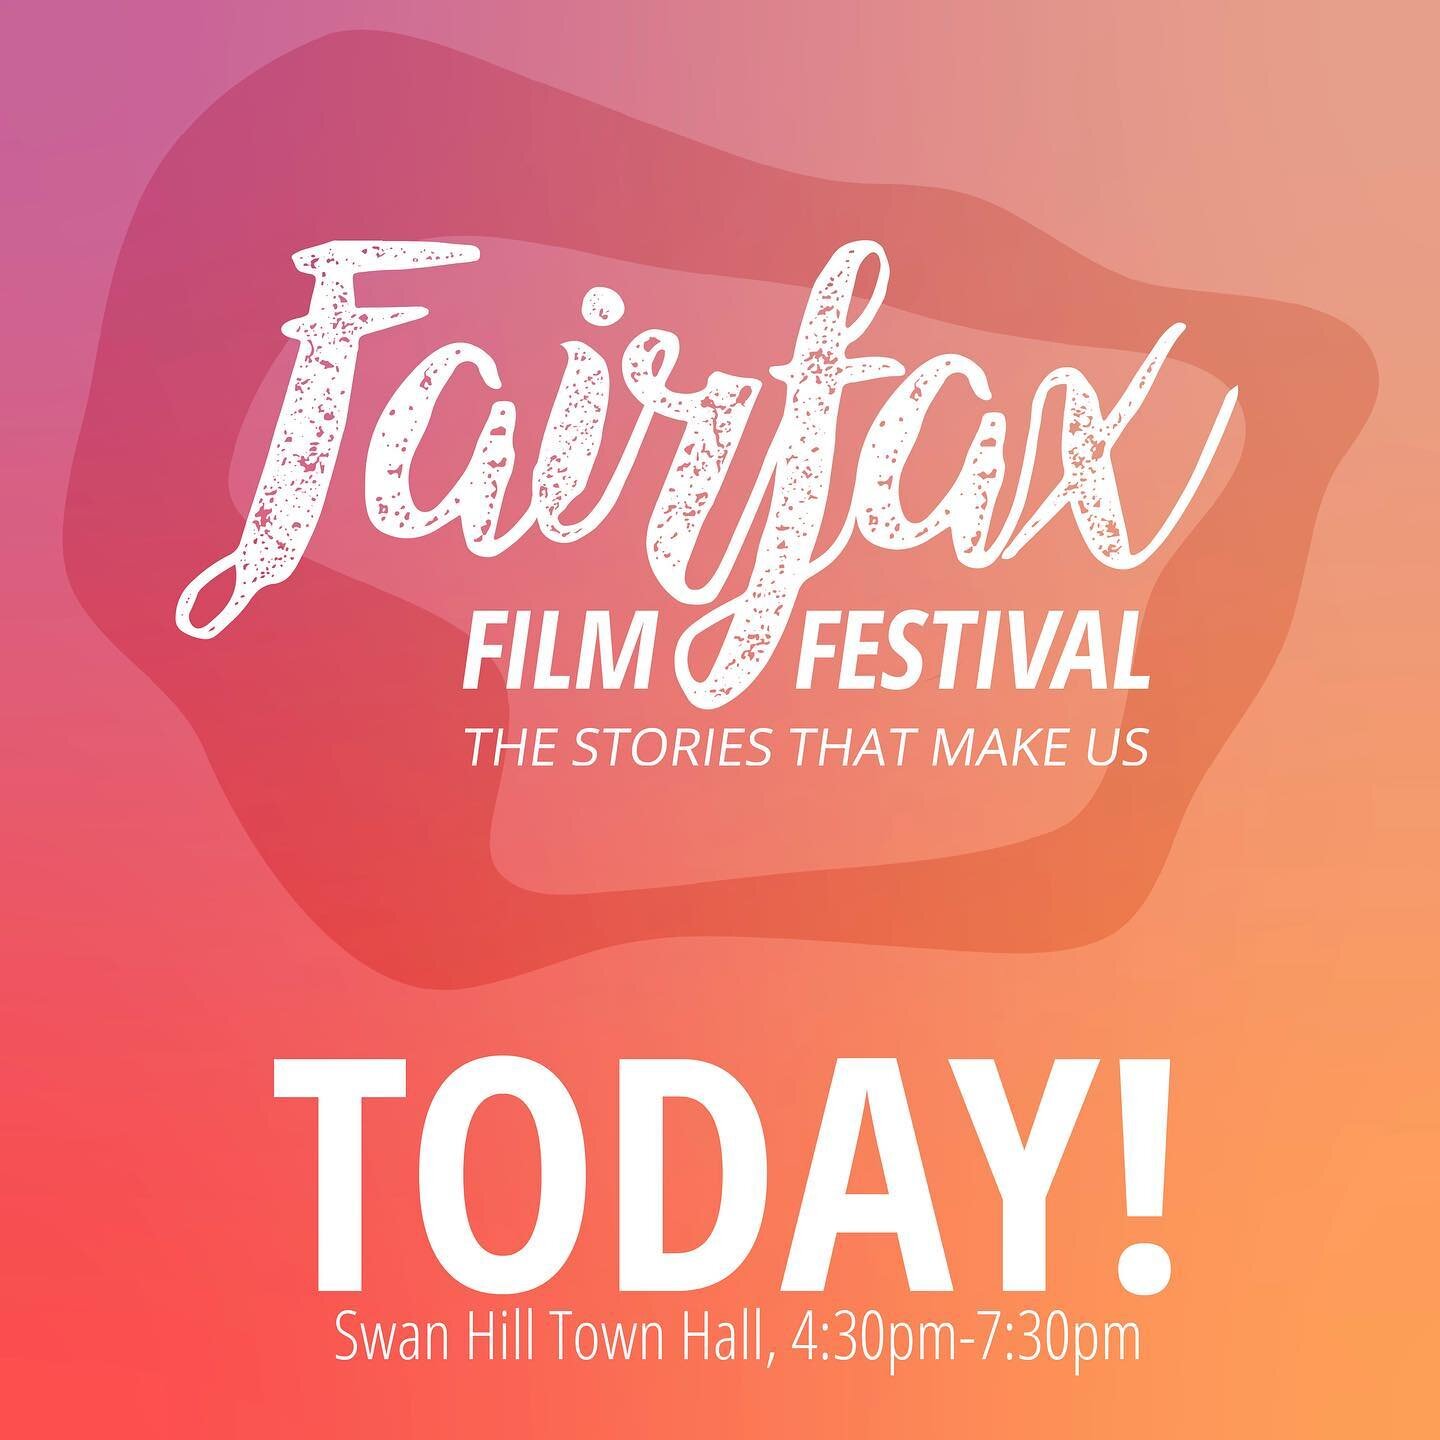 TODAY IS THE DAY!
Fairfax Film Festival is finally here 🤩🎉🎊

Be sure to catch food trucks, candy bar and live music by Sophie Kelly from 4:30pm to kick off the event at Swan Hill Town Hall! 

Turn up for the awesome young artists in our fantastic 